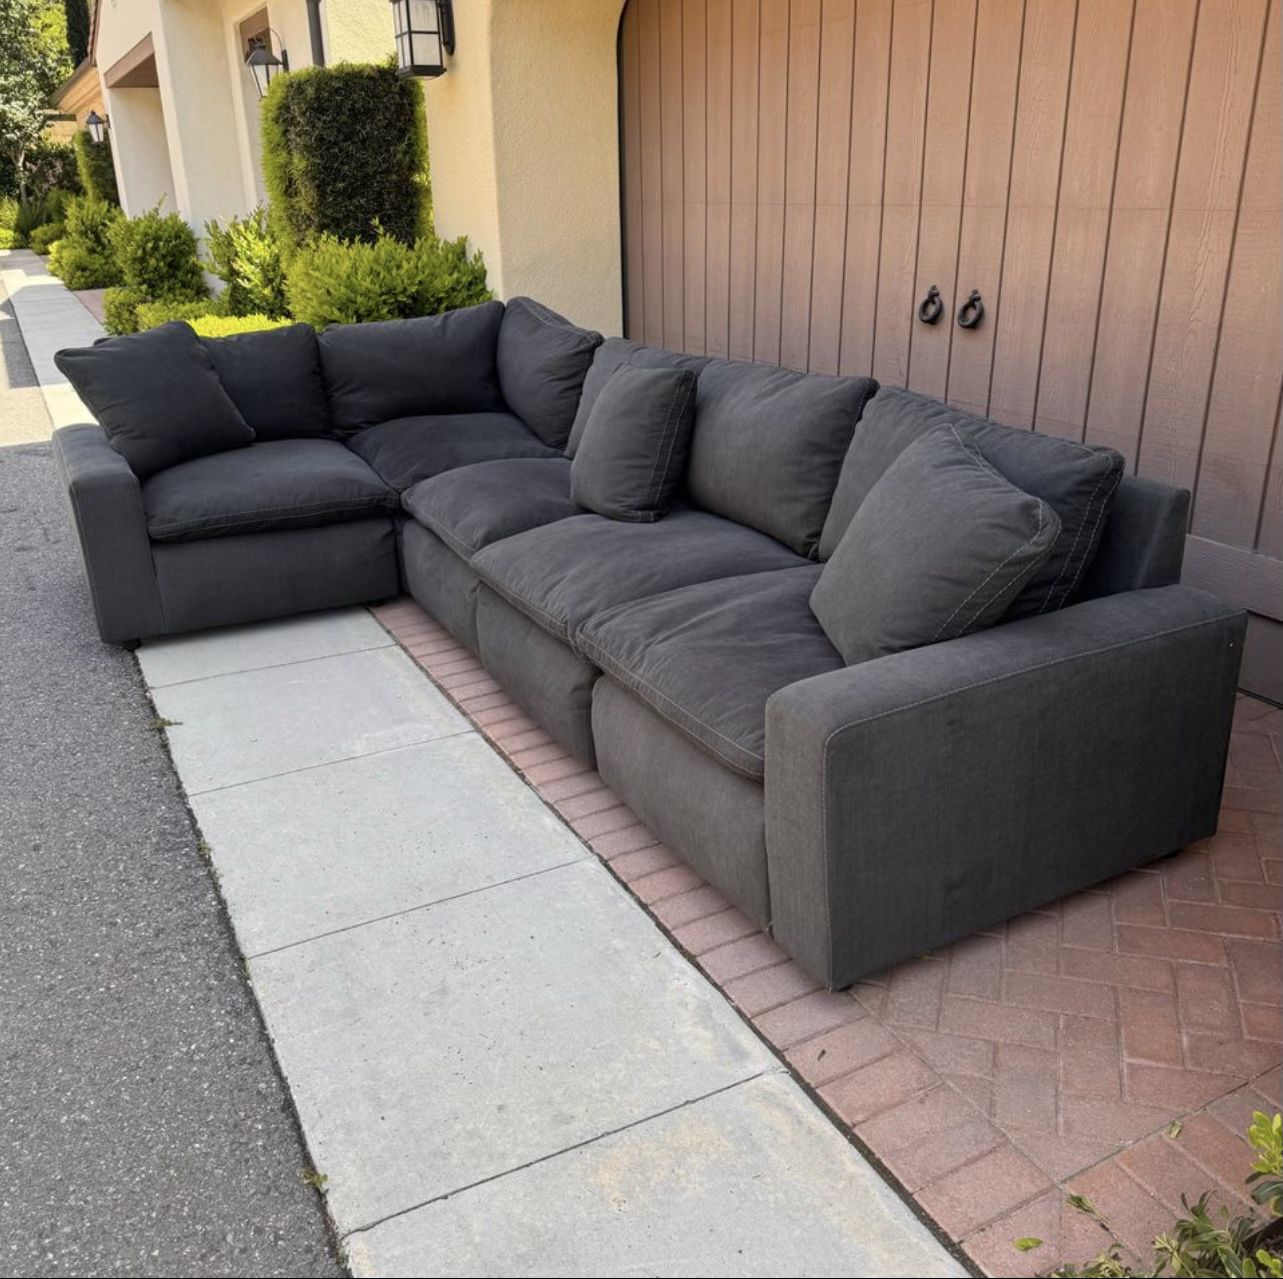 SAVESTO CHARCOAL GRAY 4- PIECE SECTIONAL - FREE DELIVERY 🚚‼️